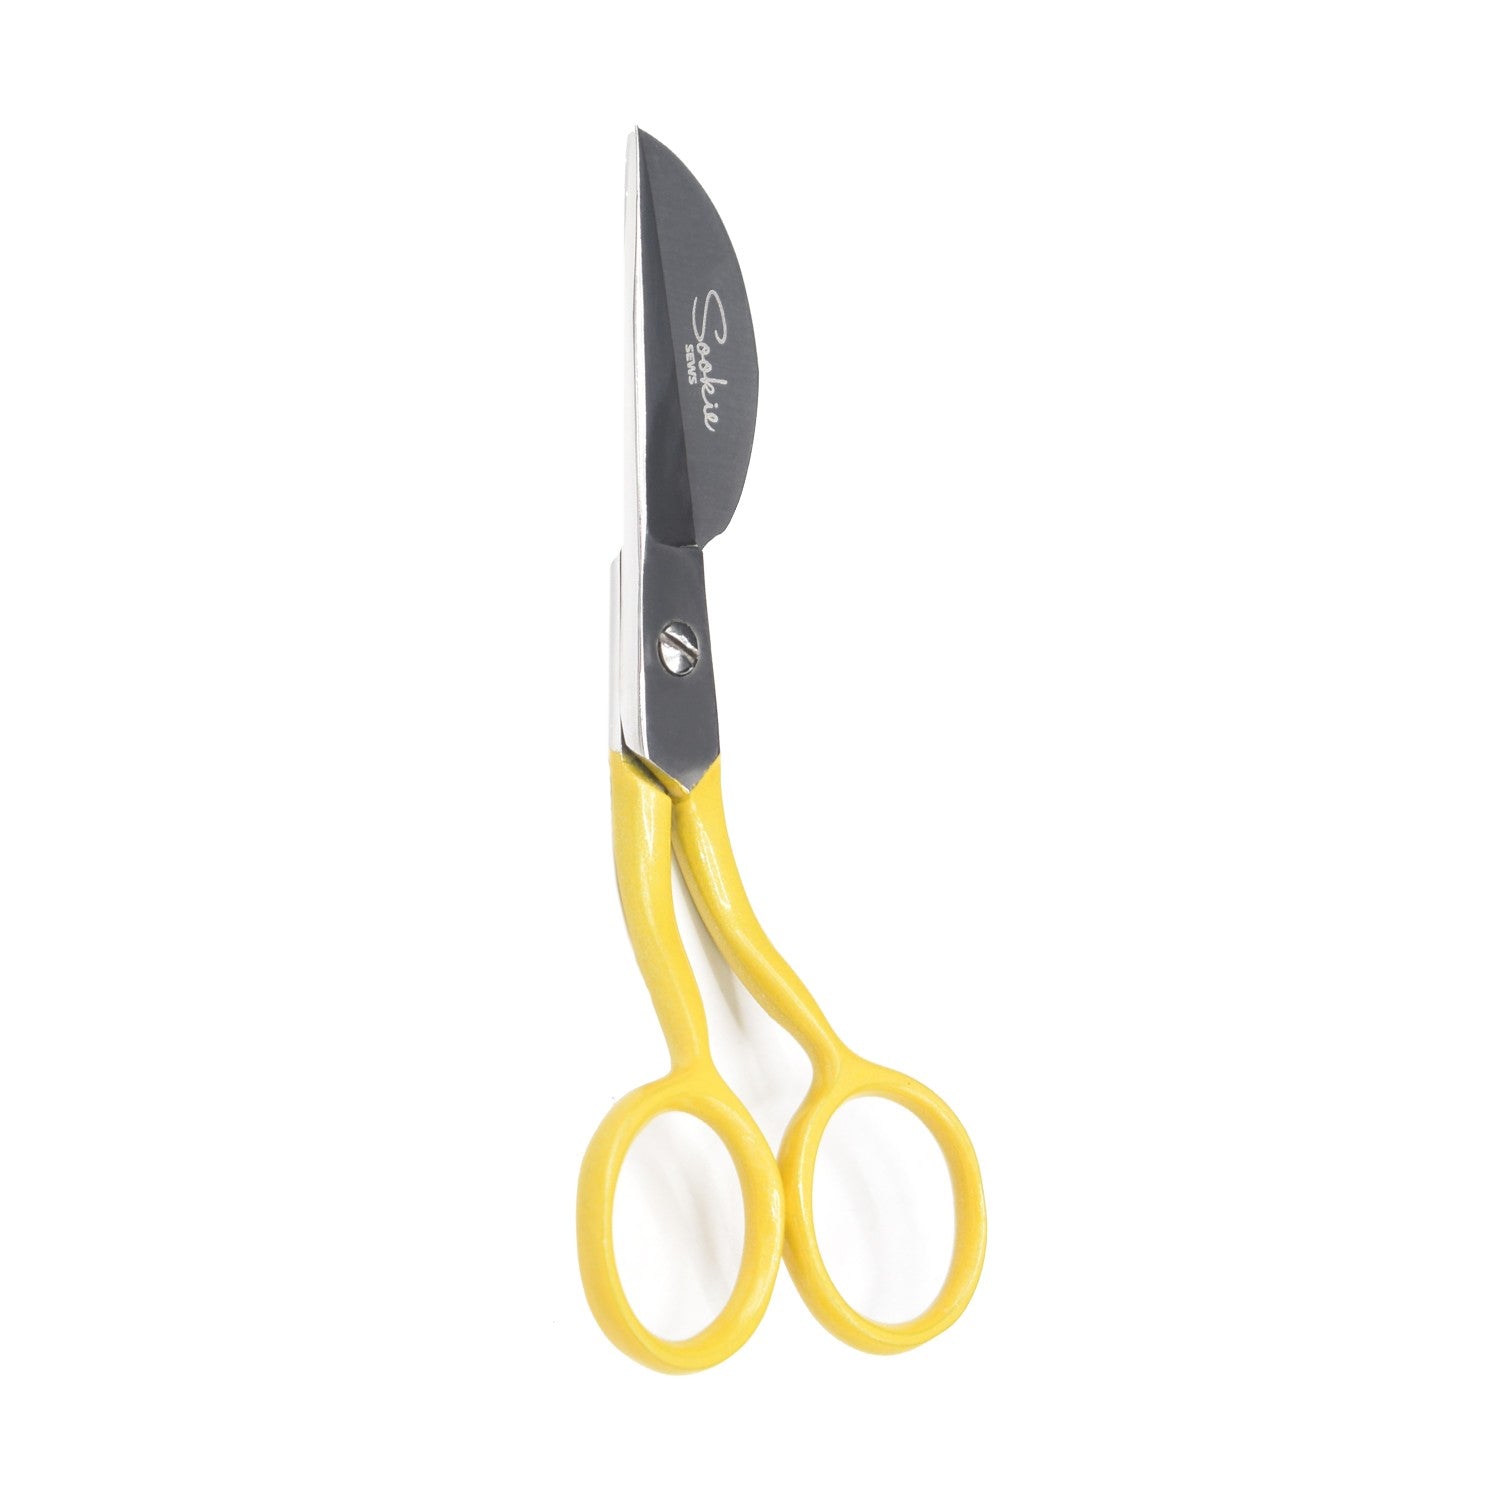 Duckbill Scissors: What They Are And How To Use Them